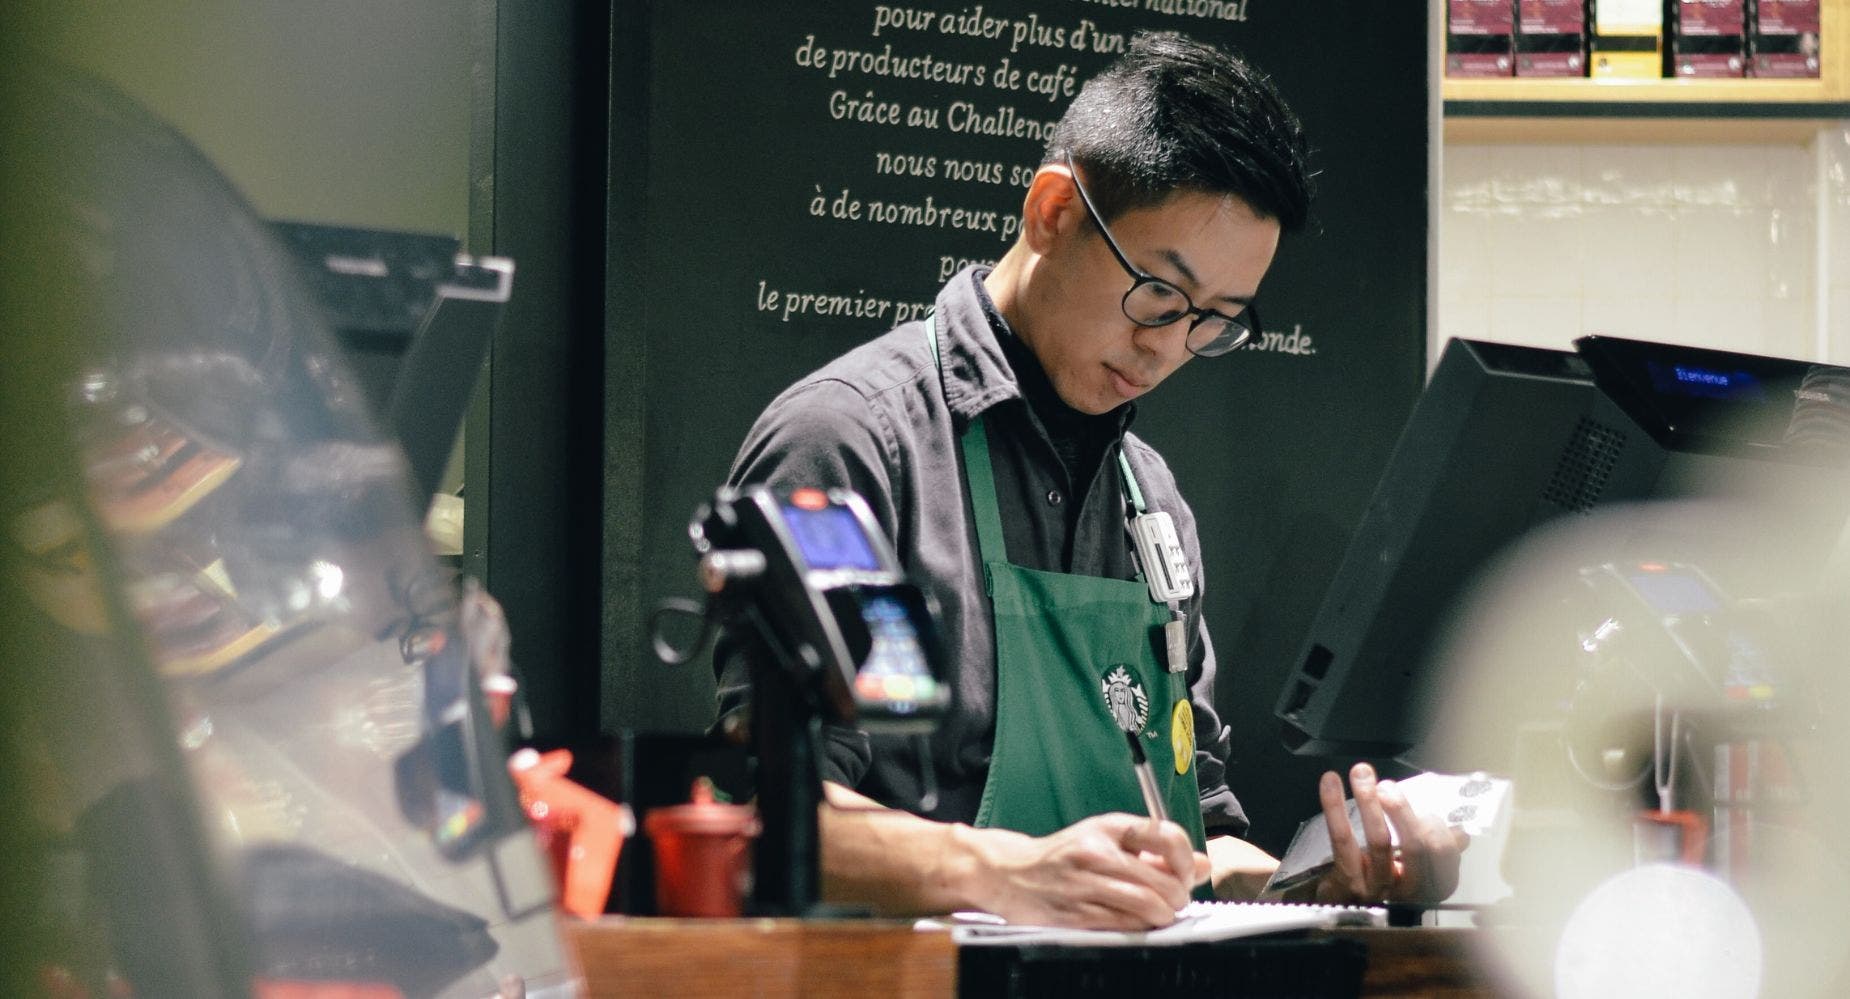 New Starbucks CEO To Focus On Unions, Pay And Benefits As Part Of 'Reinvention' Plan